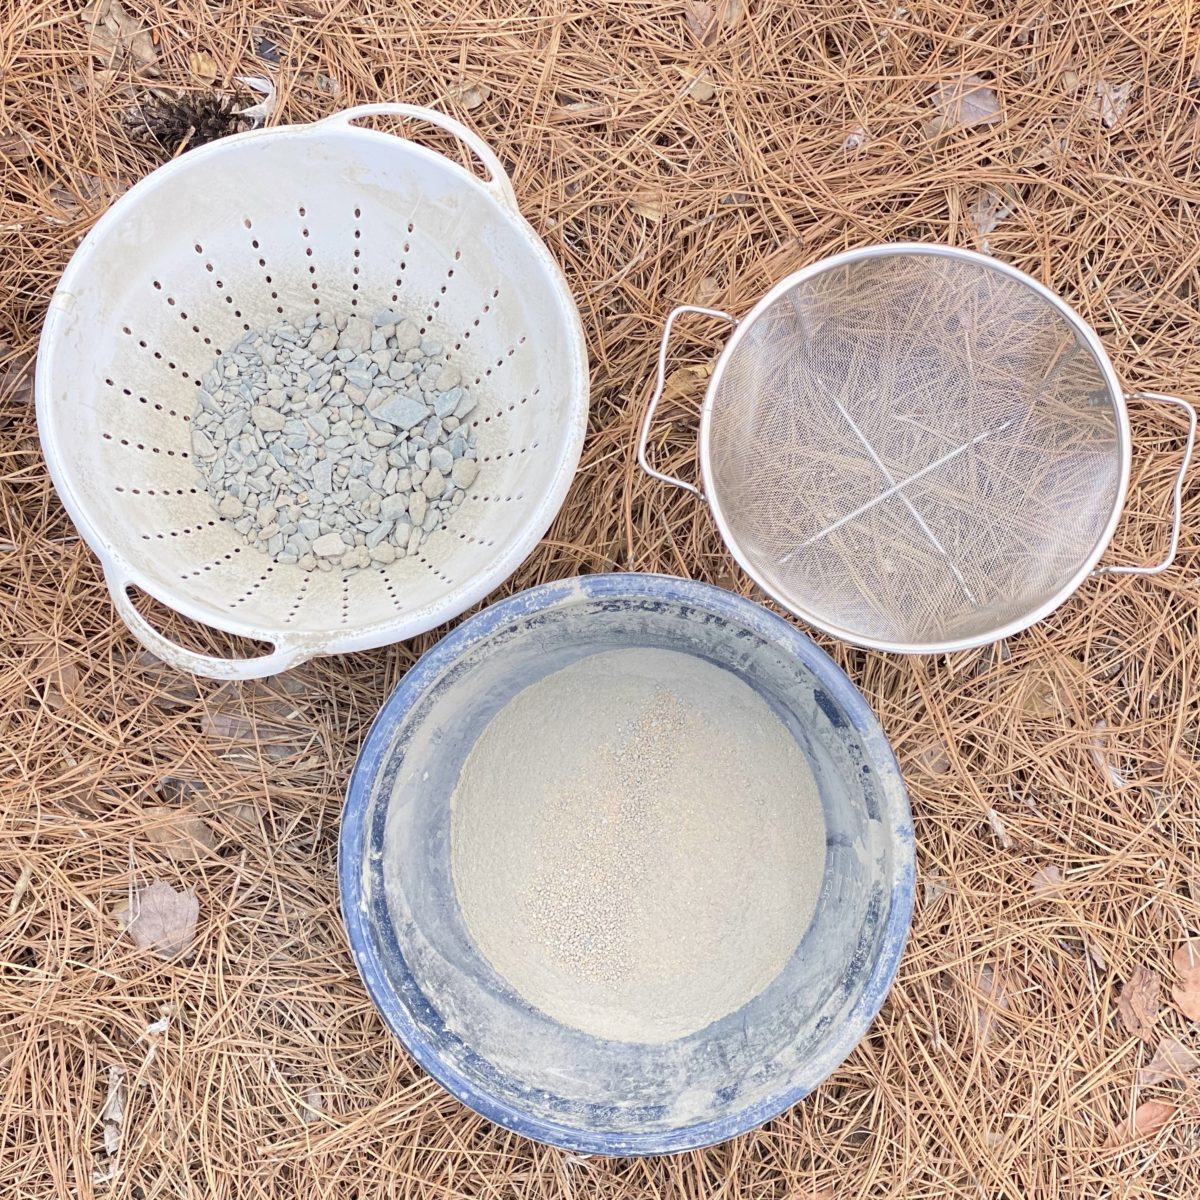 A colander, wire mesh sifter, and concrete that has been sifted in a bowl.